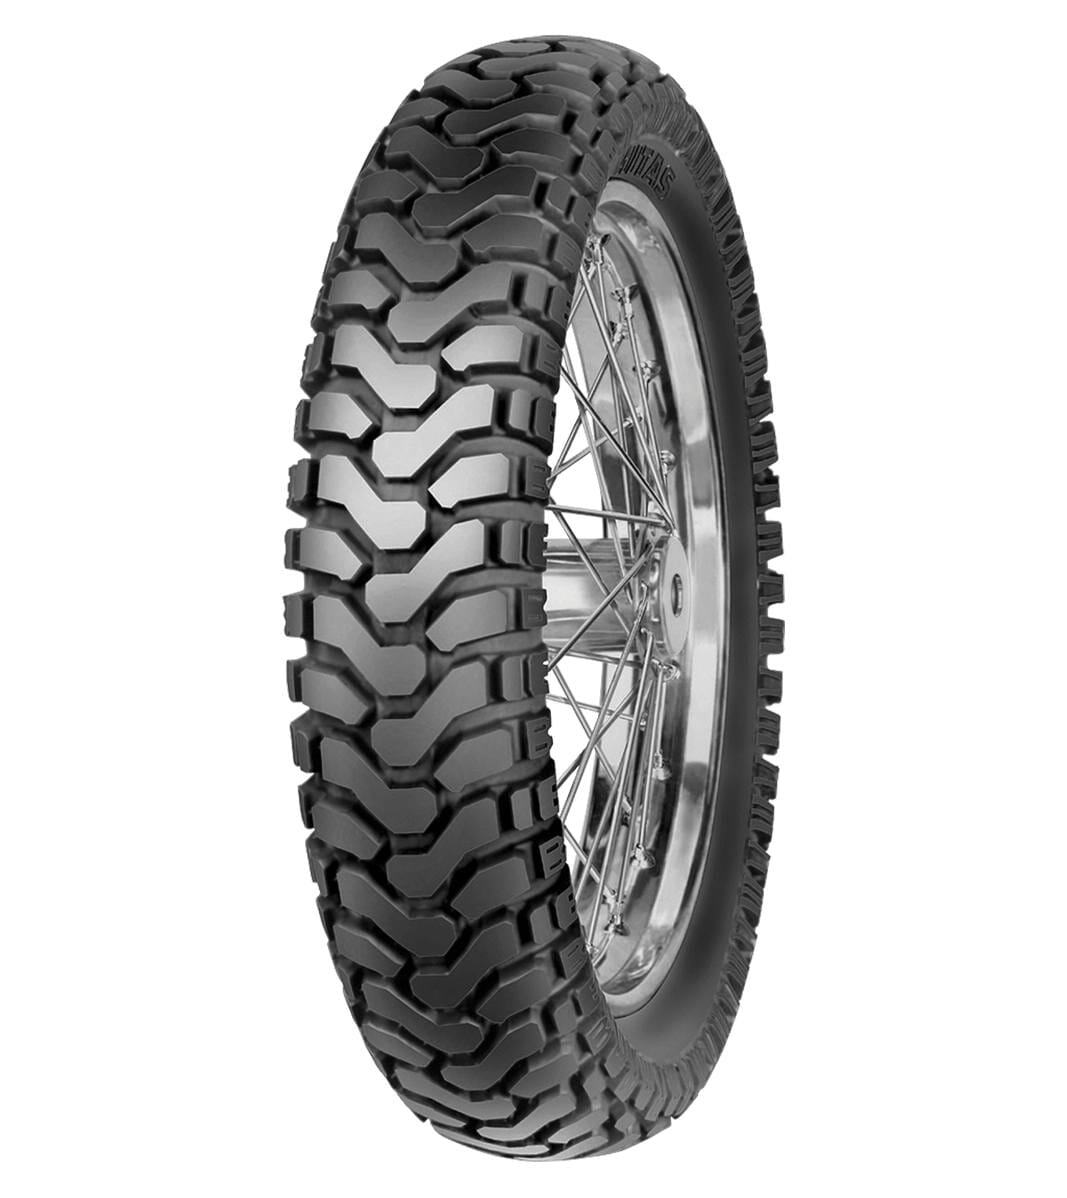 Mitas E-07 ENDURO 140/80-18 Trail OFF Trail 70T No Stripe Tubeless Rear Tire, 224427, 140/80-18, Adventure Touring, E Series, E-07 Enduro, Rear, Trail, Trail OFF, Tires - Imported and distributed in North &amp; South America by Lindeco Genuine Powersports - Premier Powersports Equipment and Accessories for Motorcycle Enthusiasts, Professional Riders and Dealers.